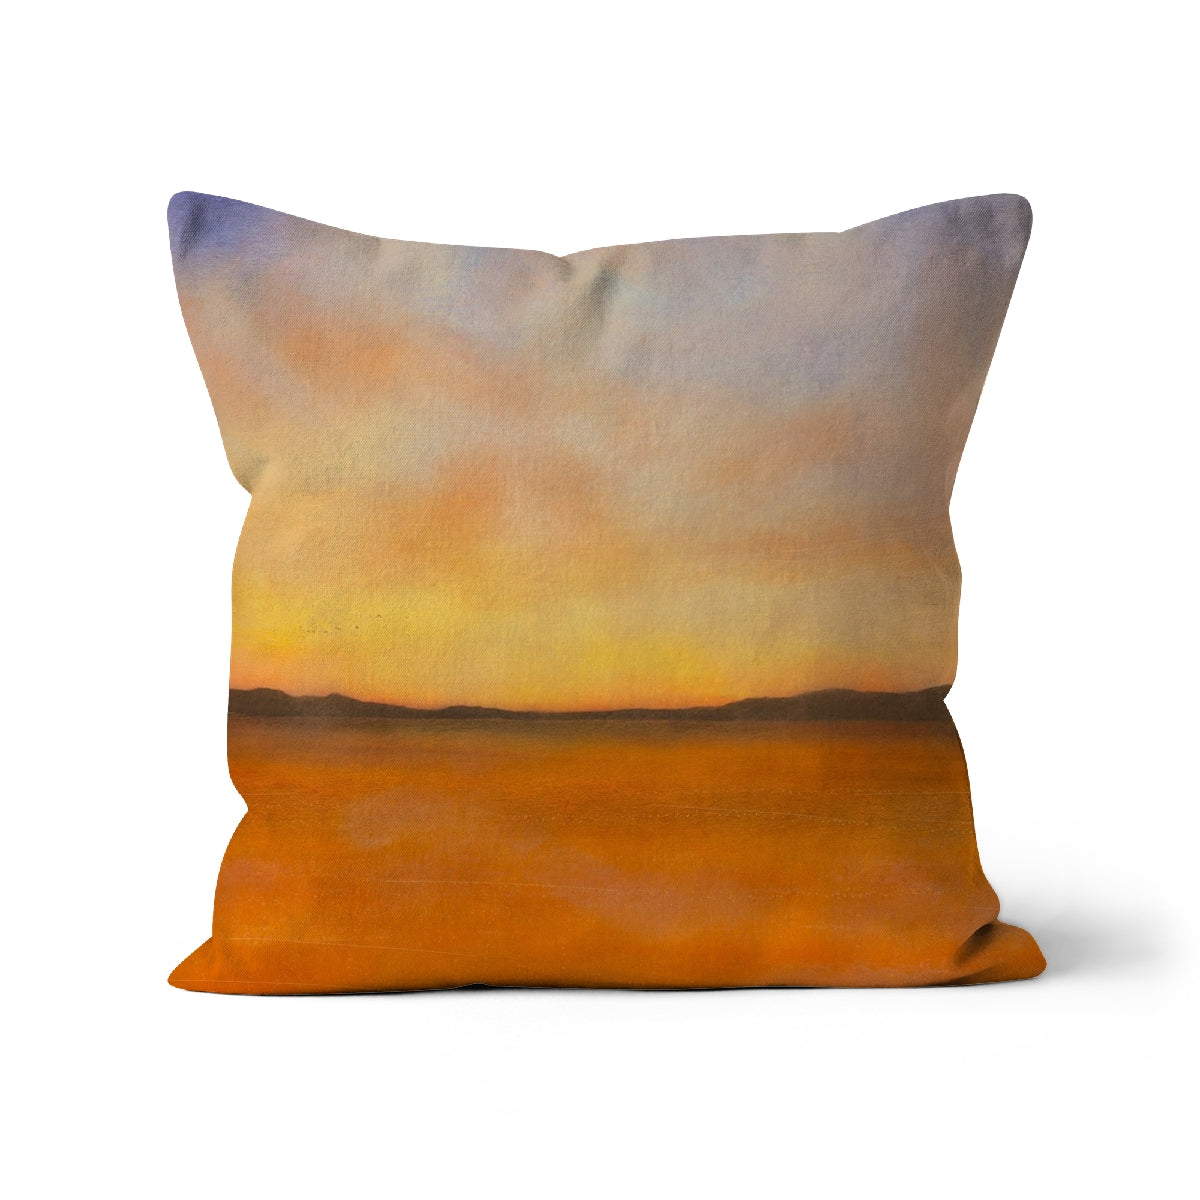 Islay Dawn Art Gifts Cushion-Cushions-Hebridean Islands Art Gallery-Linen-12"x12"-Paintings, Prints, Homeware, Art Gifts From Scotland By Scottish Artist Kevin Hunter